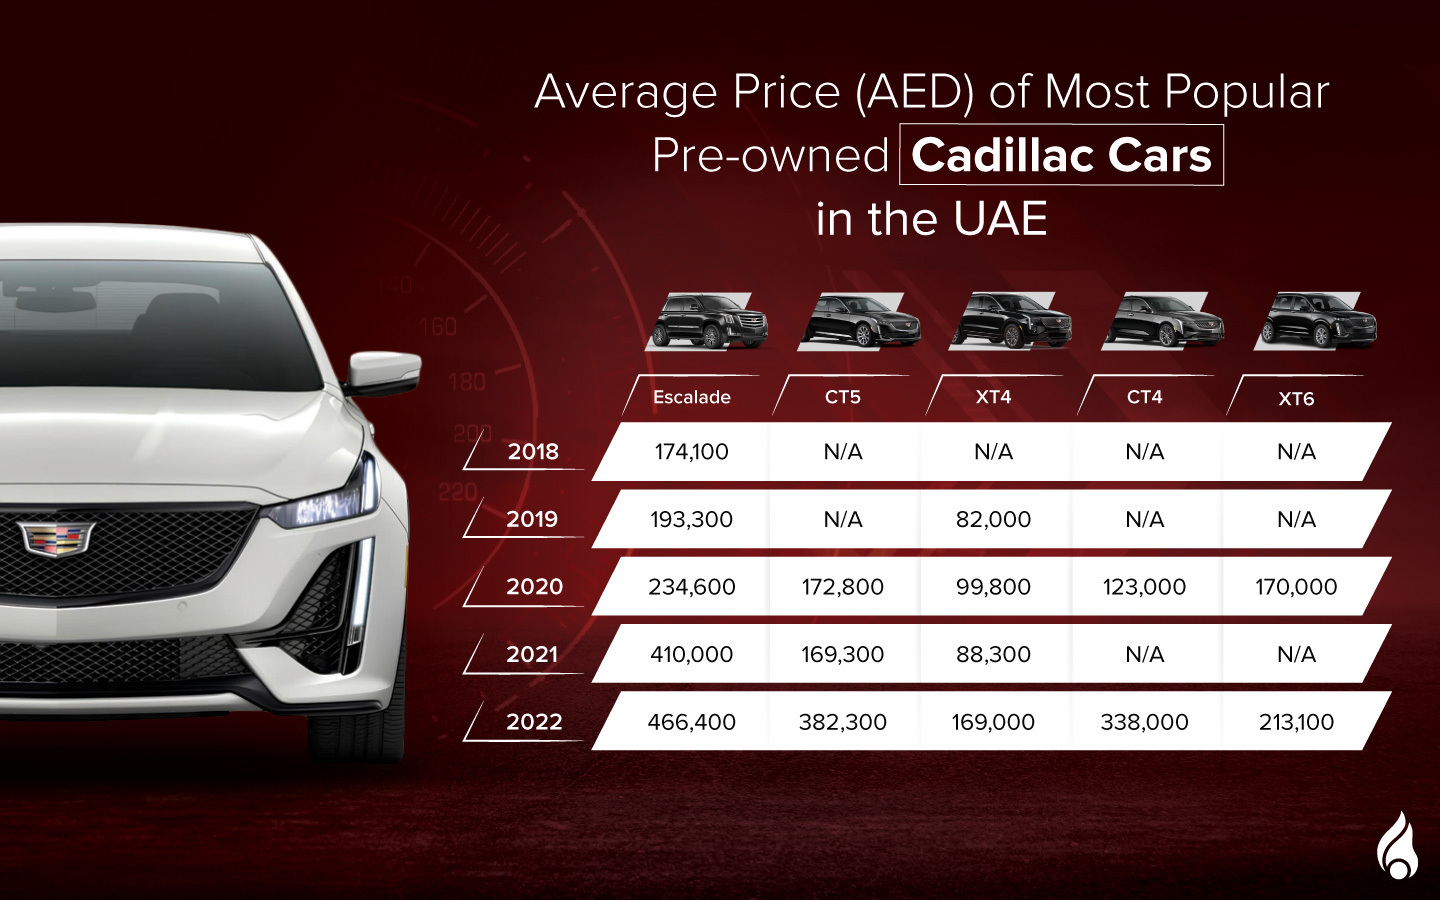 here are the average prices of the Cadillac used car models in the UAE